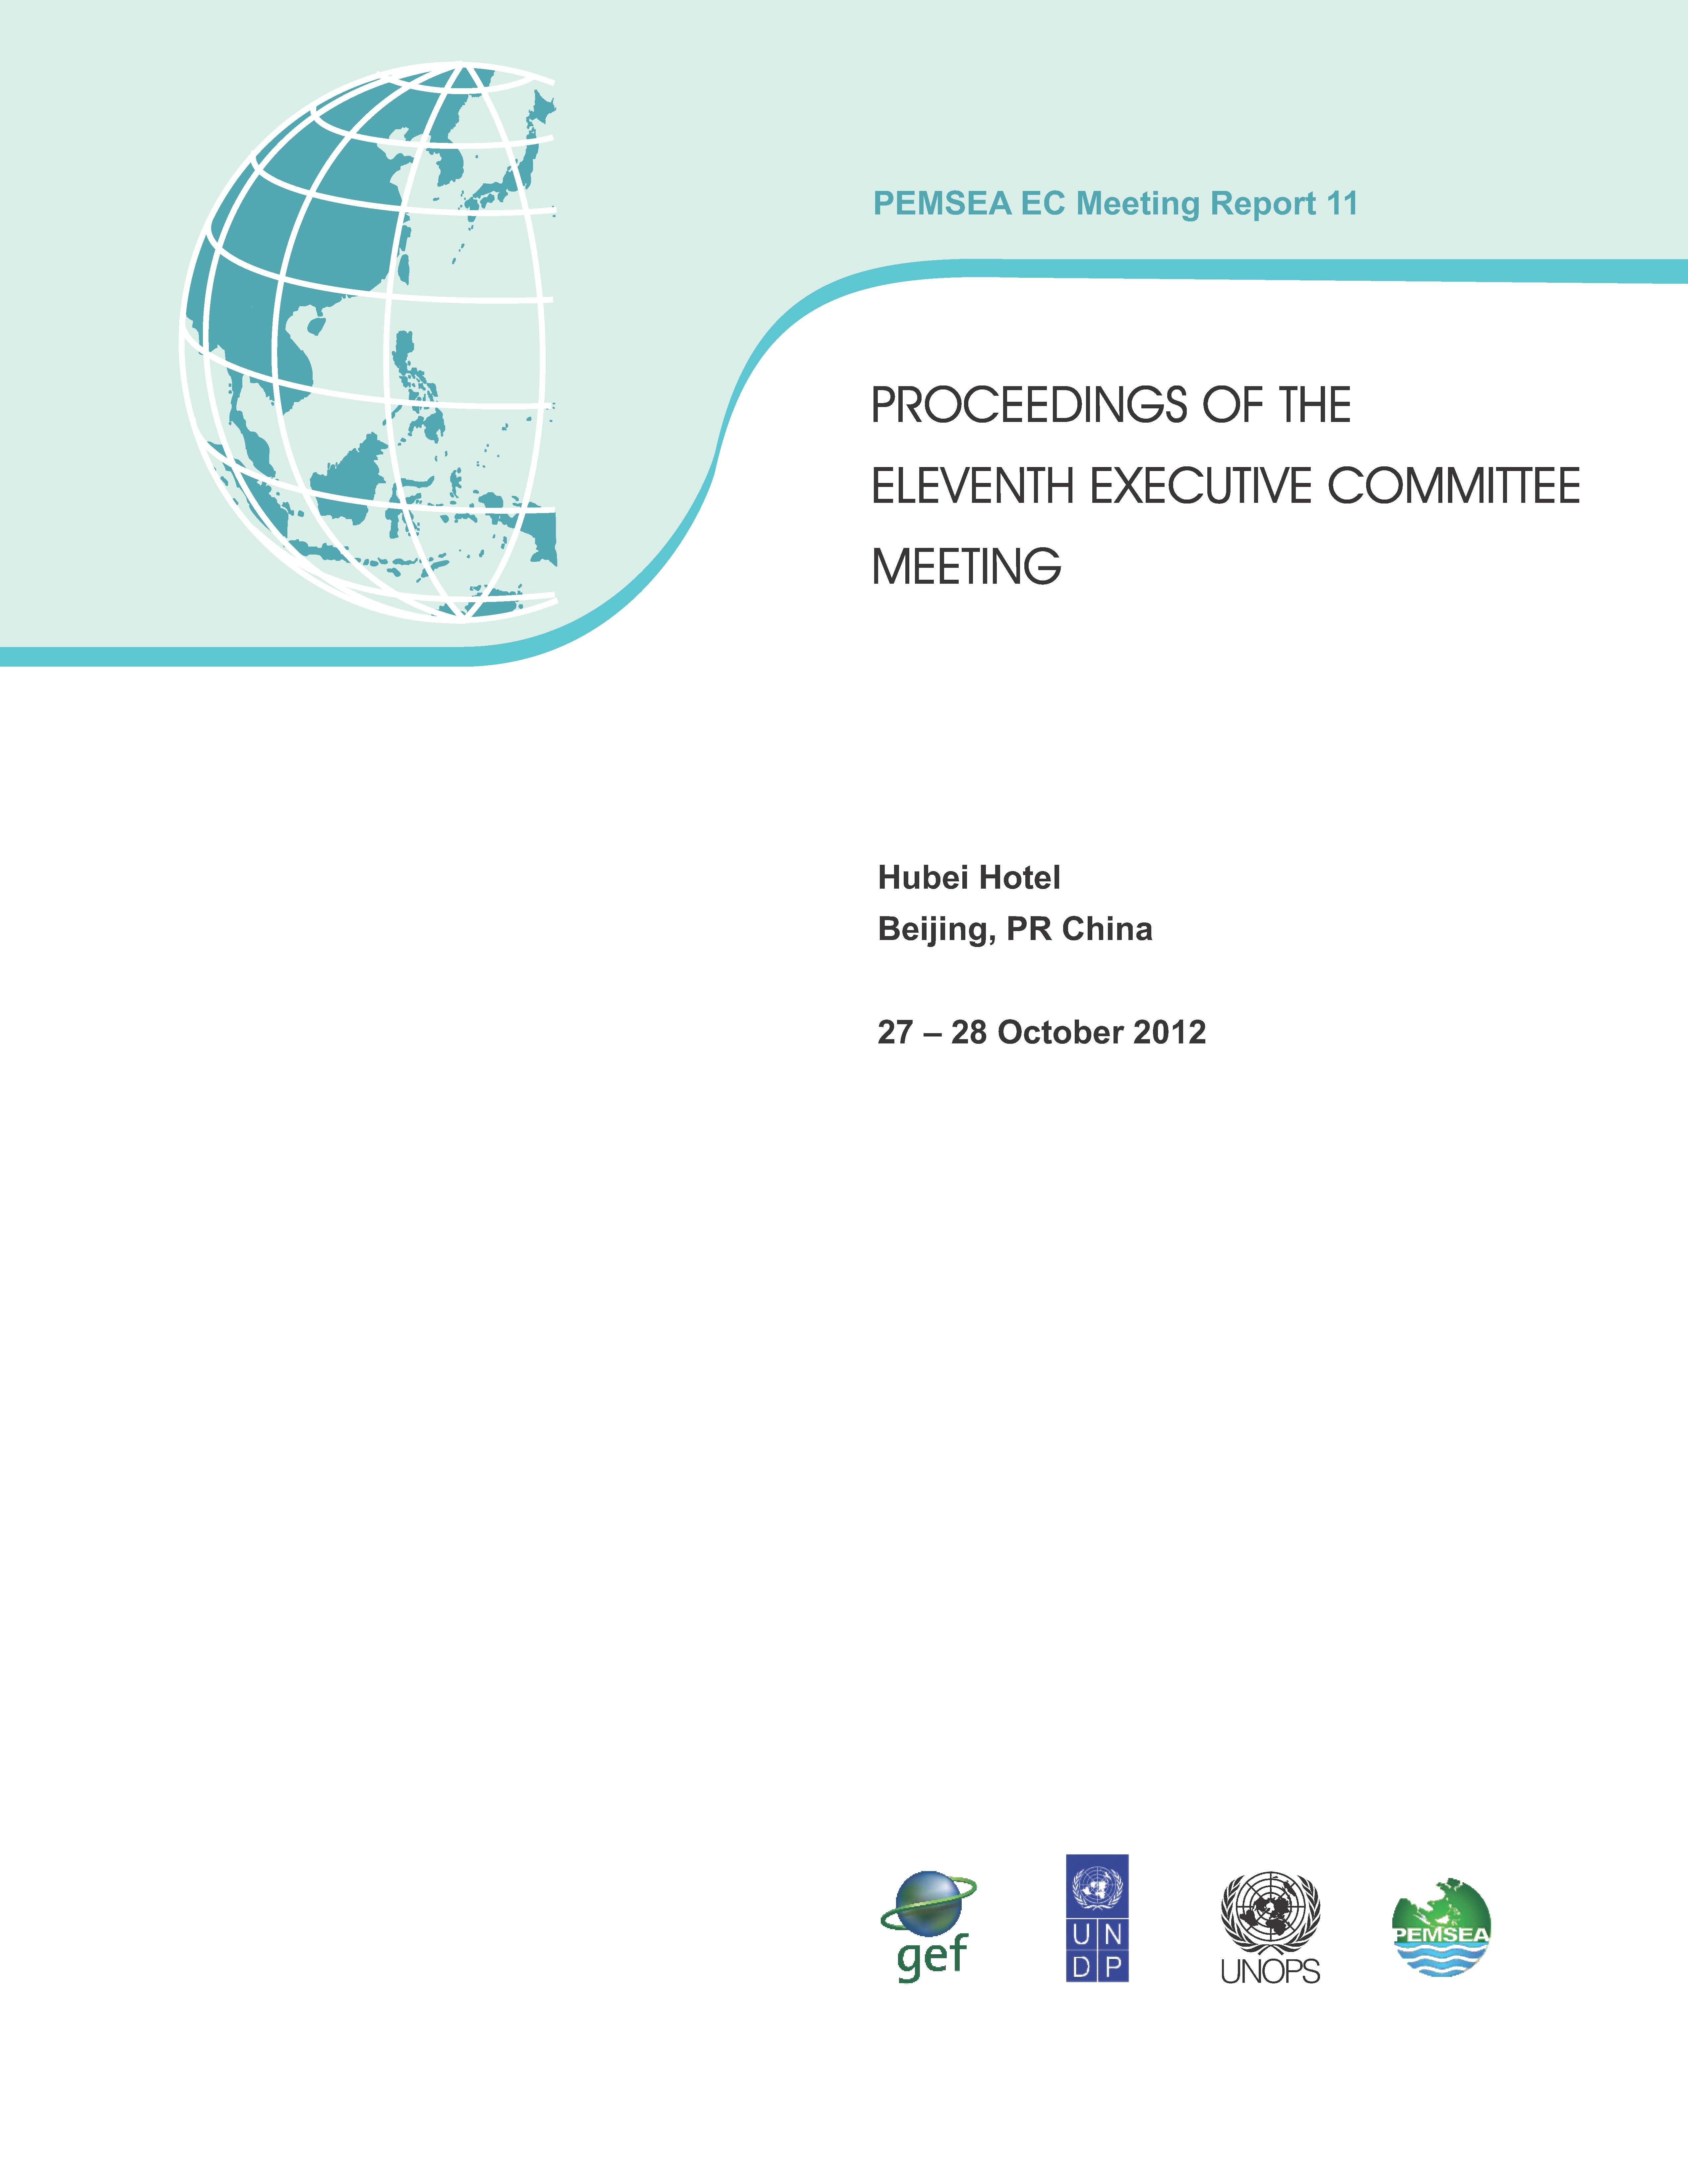 Proceedings of the Eleventh Executive Committee Meeting